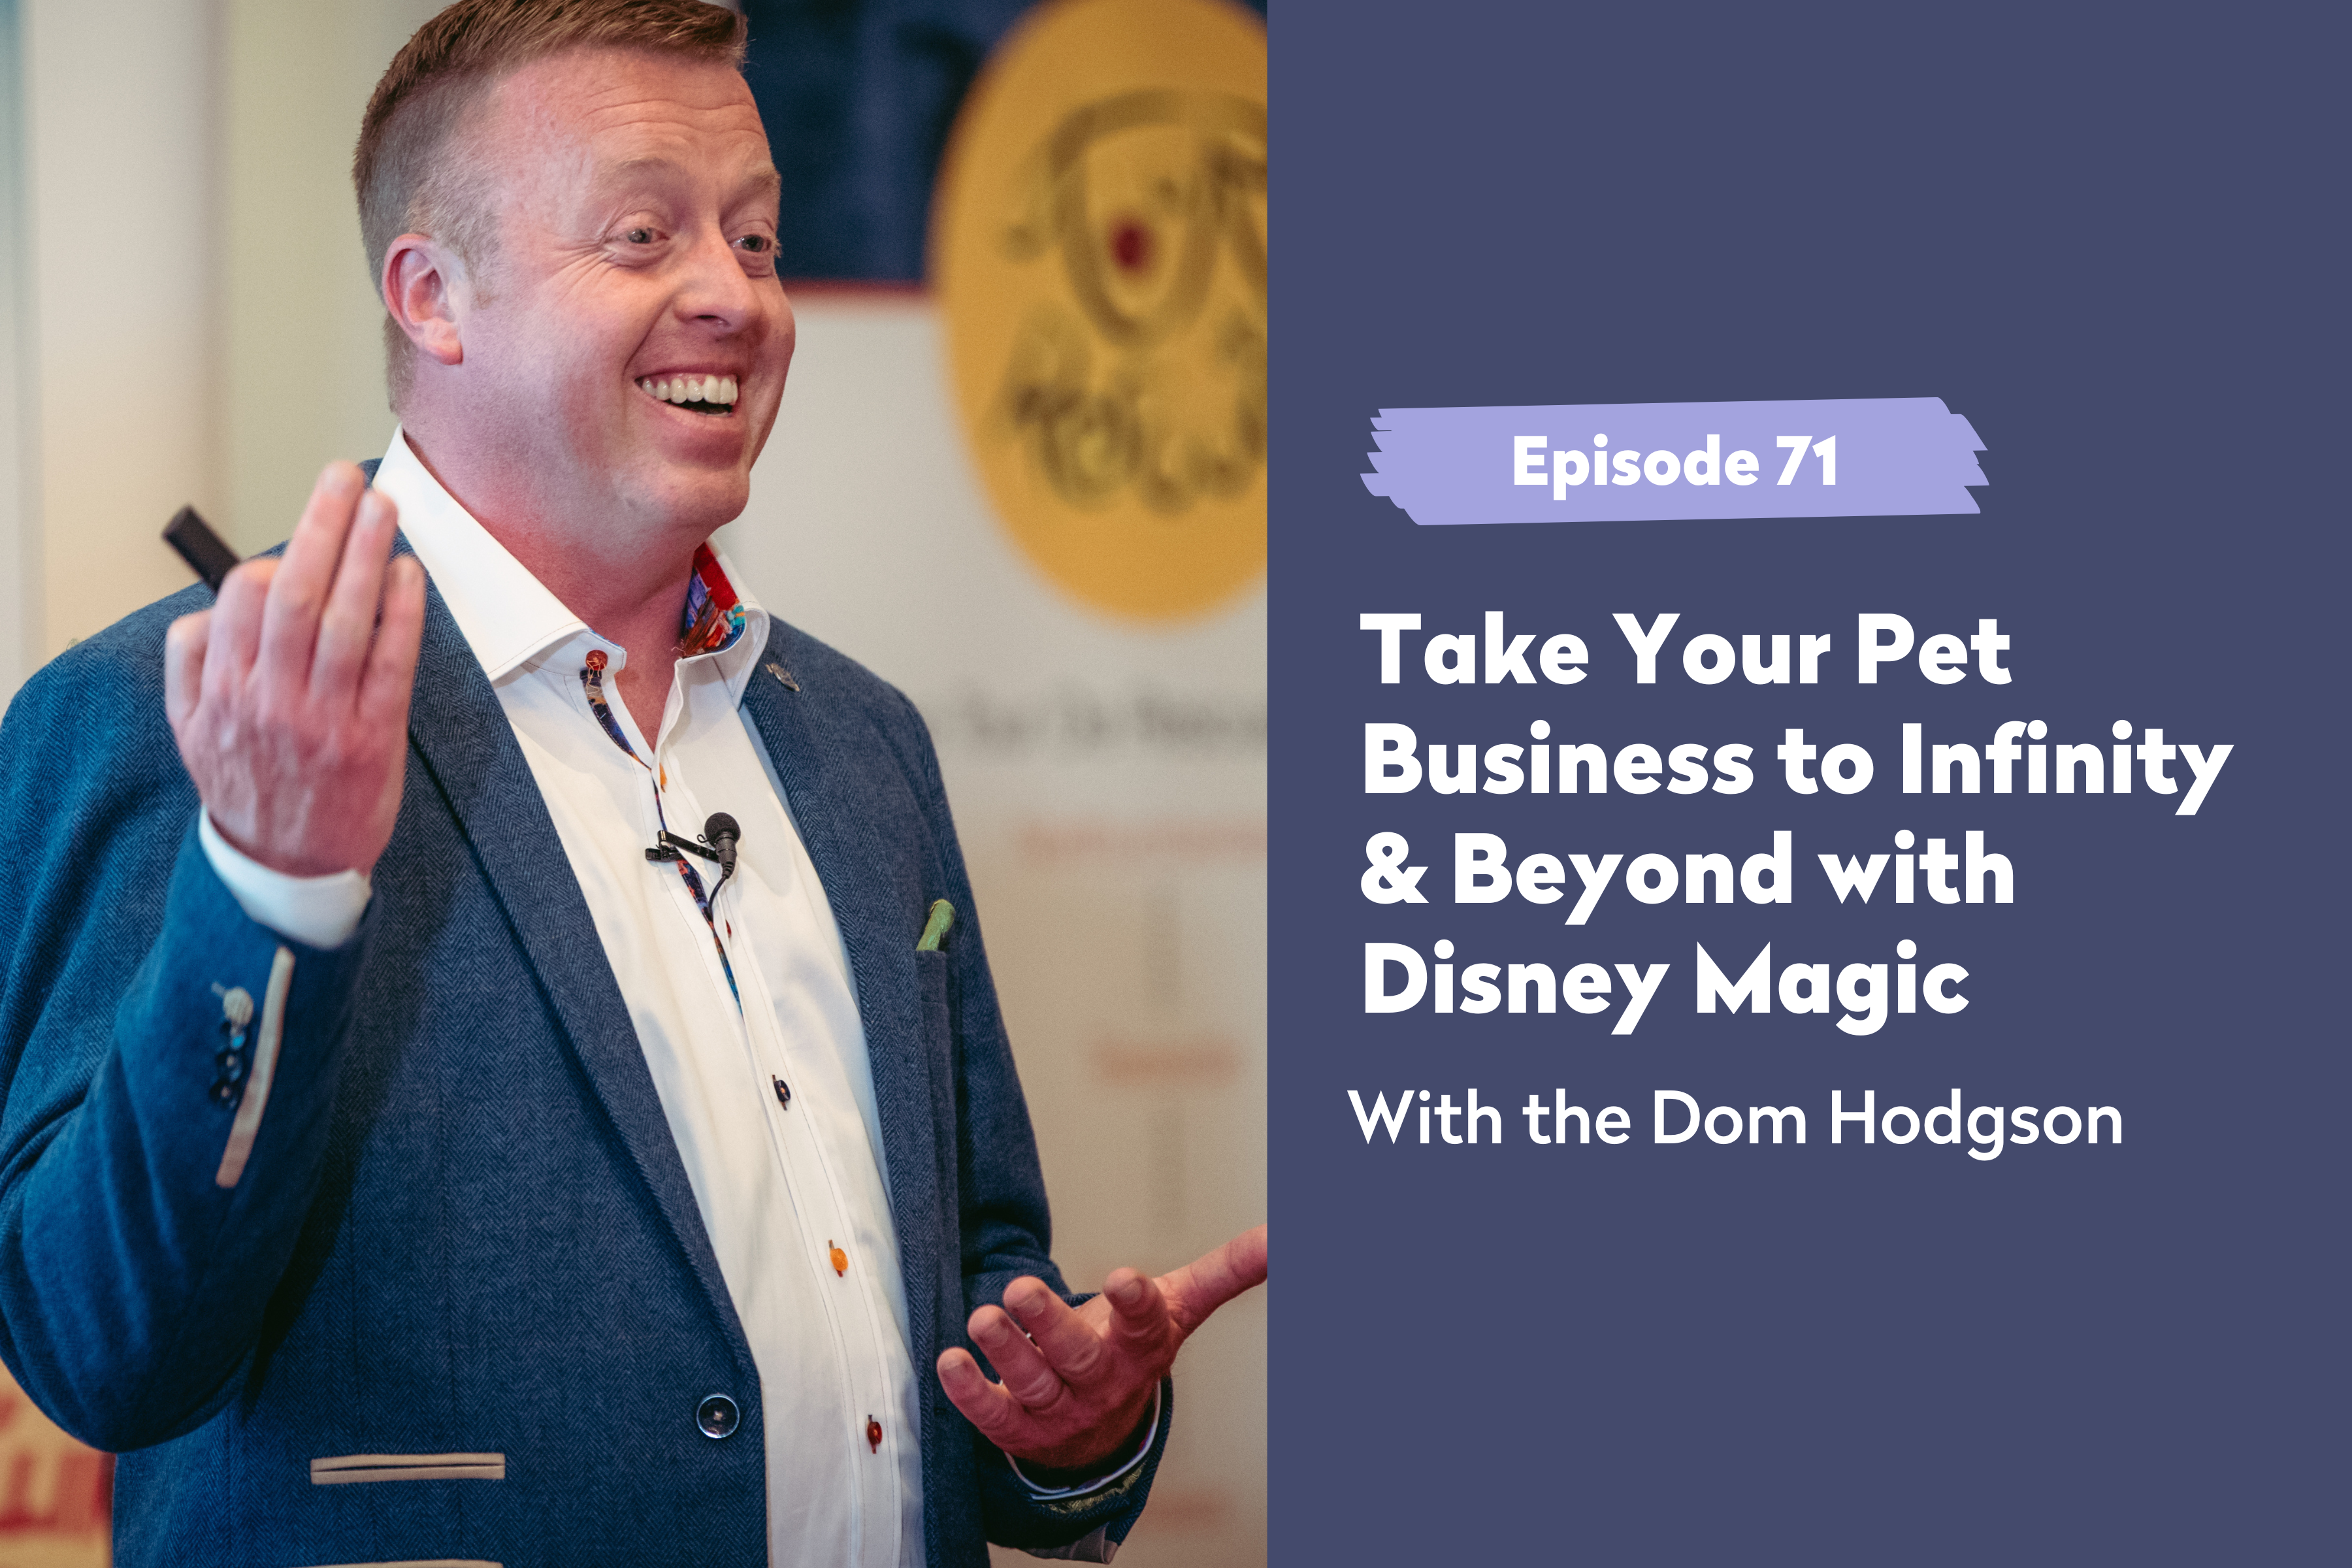 Episode 71 | Take Your Pet Business to Infinity & Beyond with Disney Magic